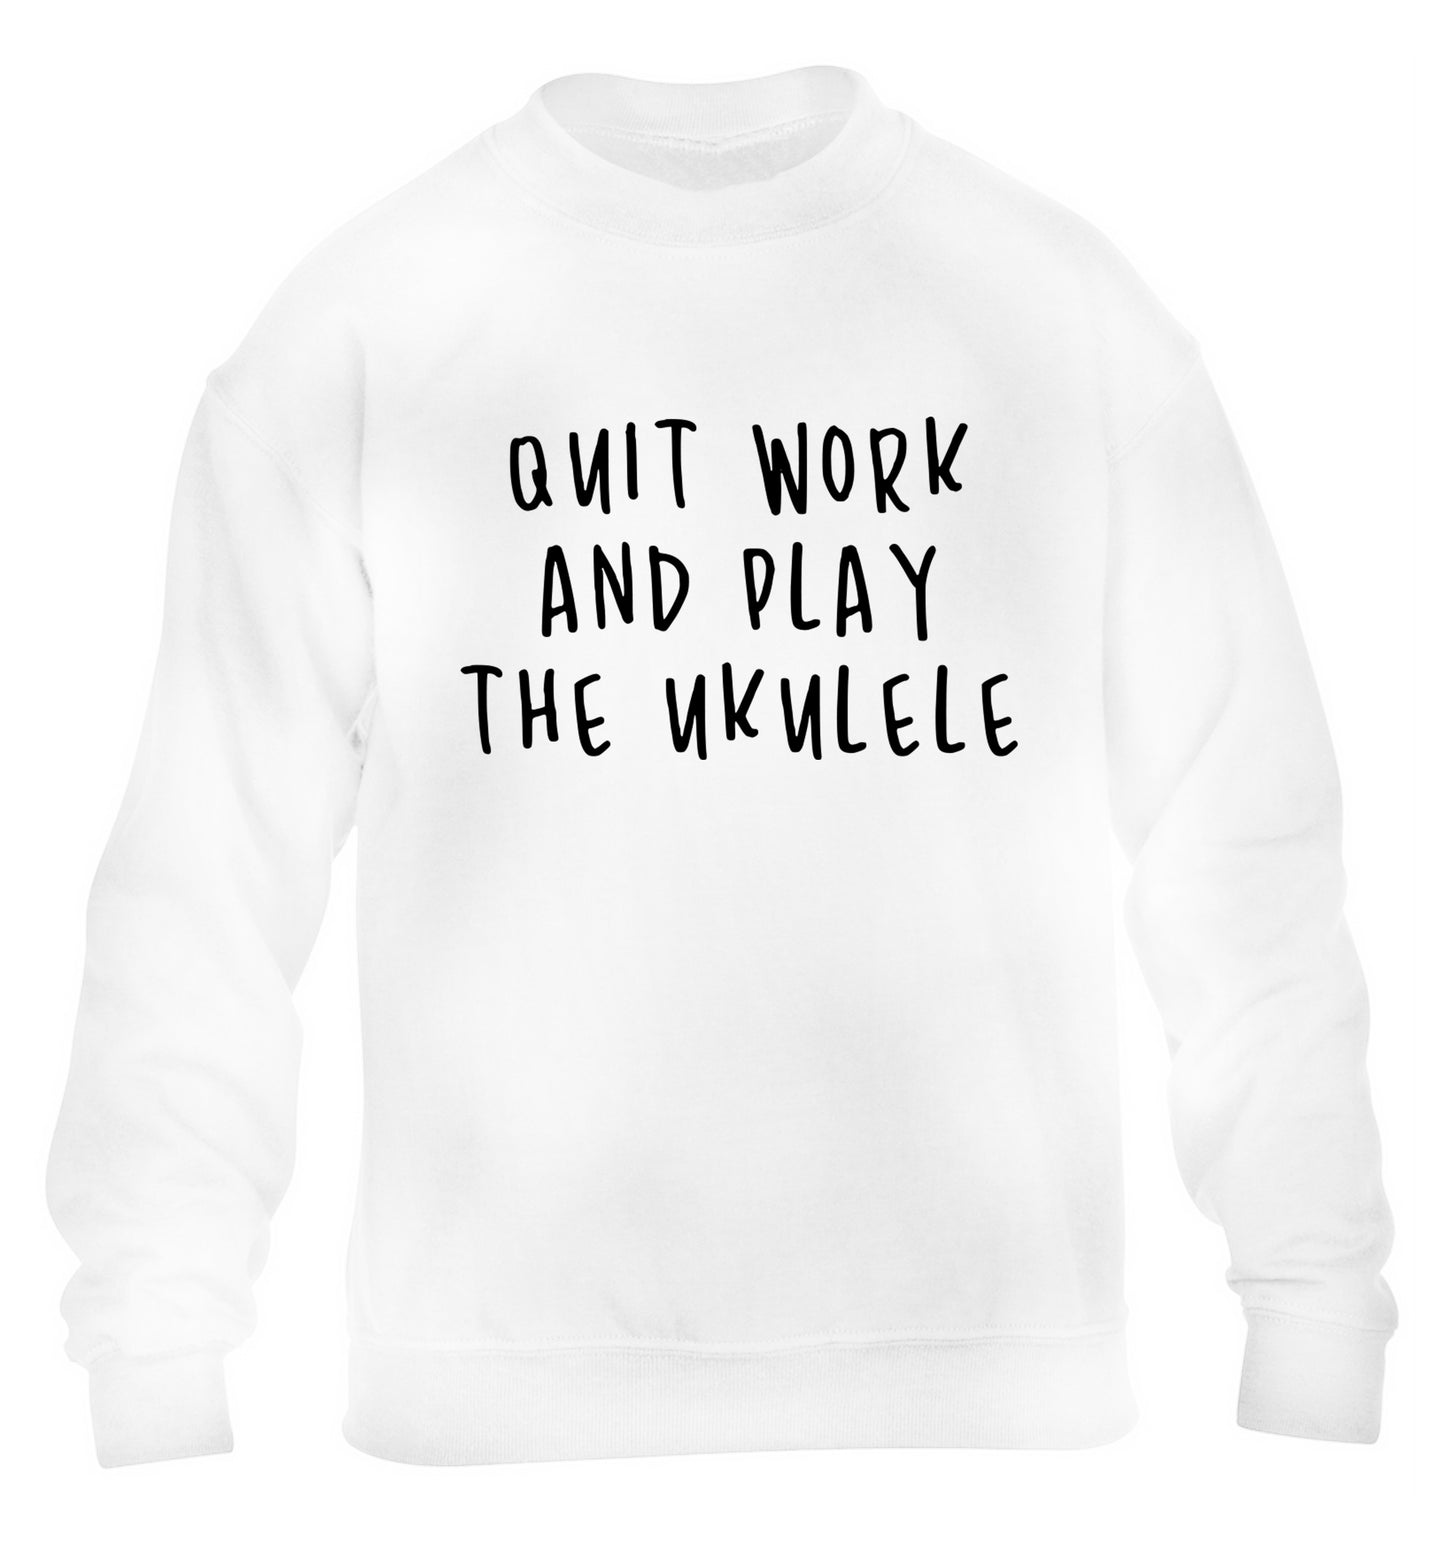 Quit work and play the ukulele children's white sweater 12-14 Years